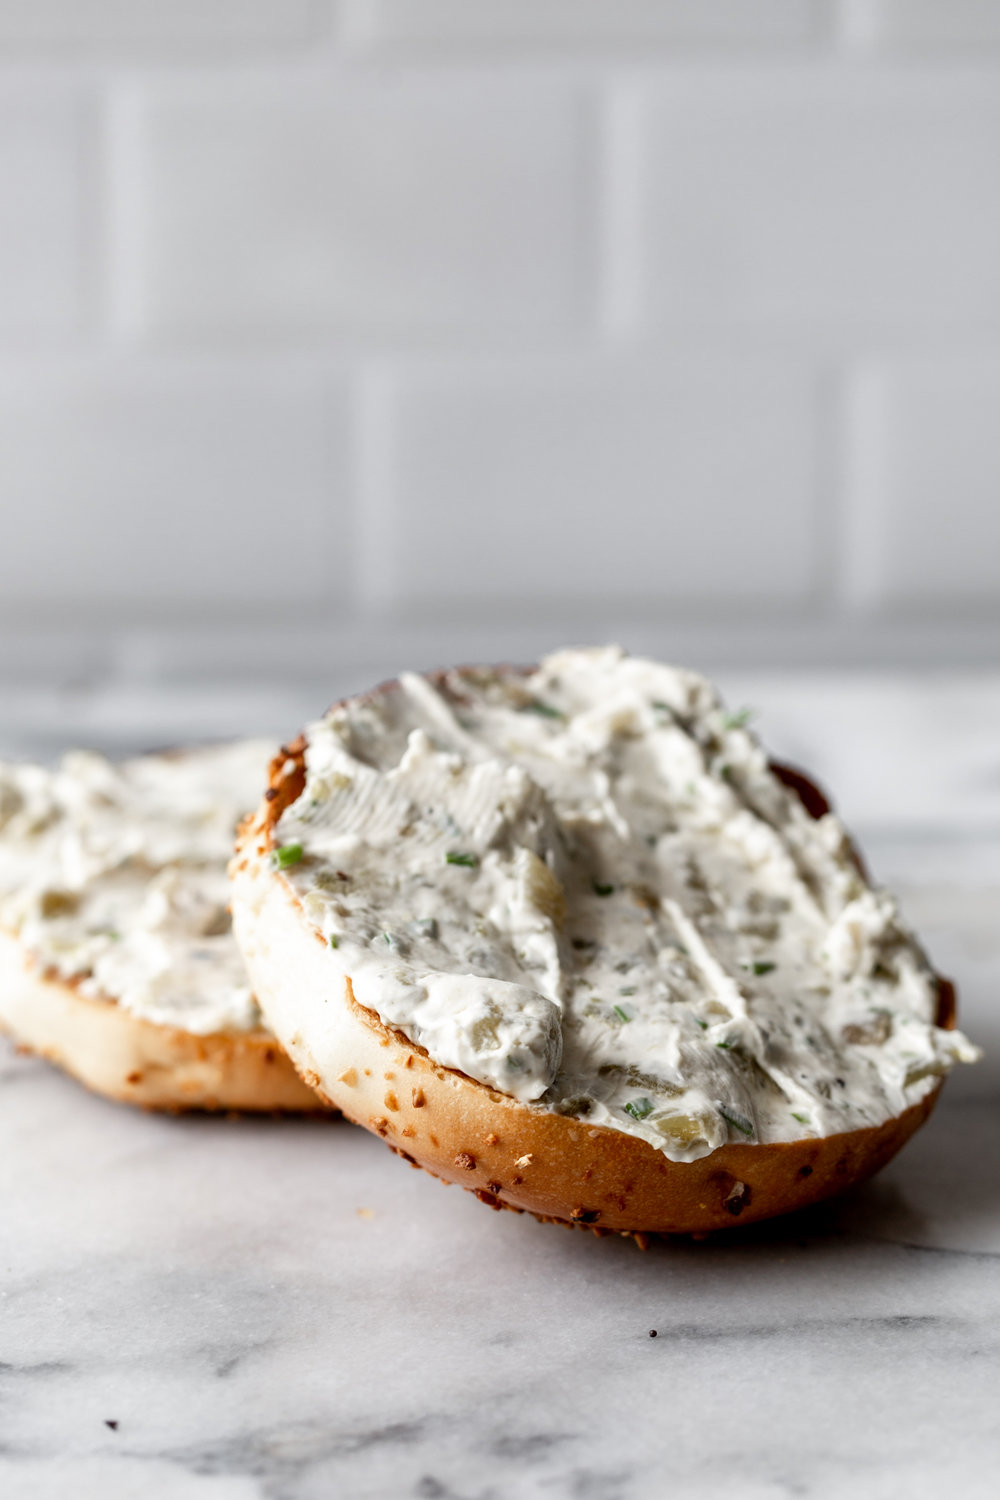 hatch chili cream cheese on toasted bagel